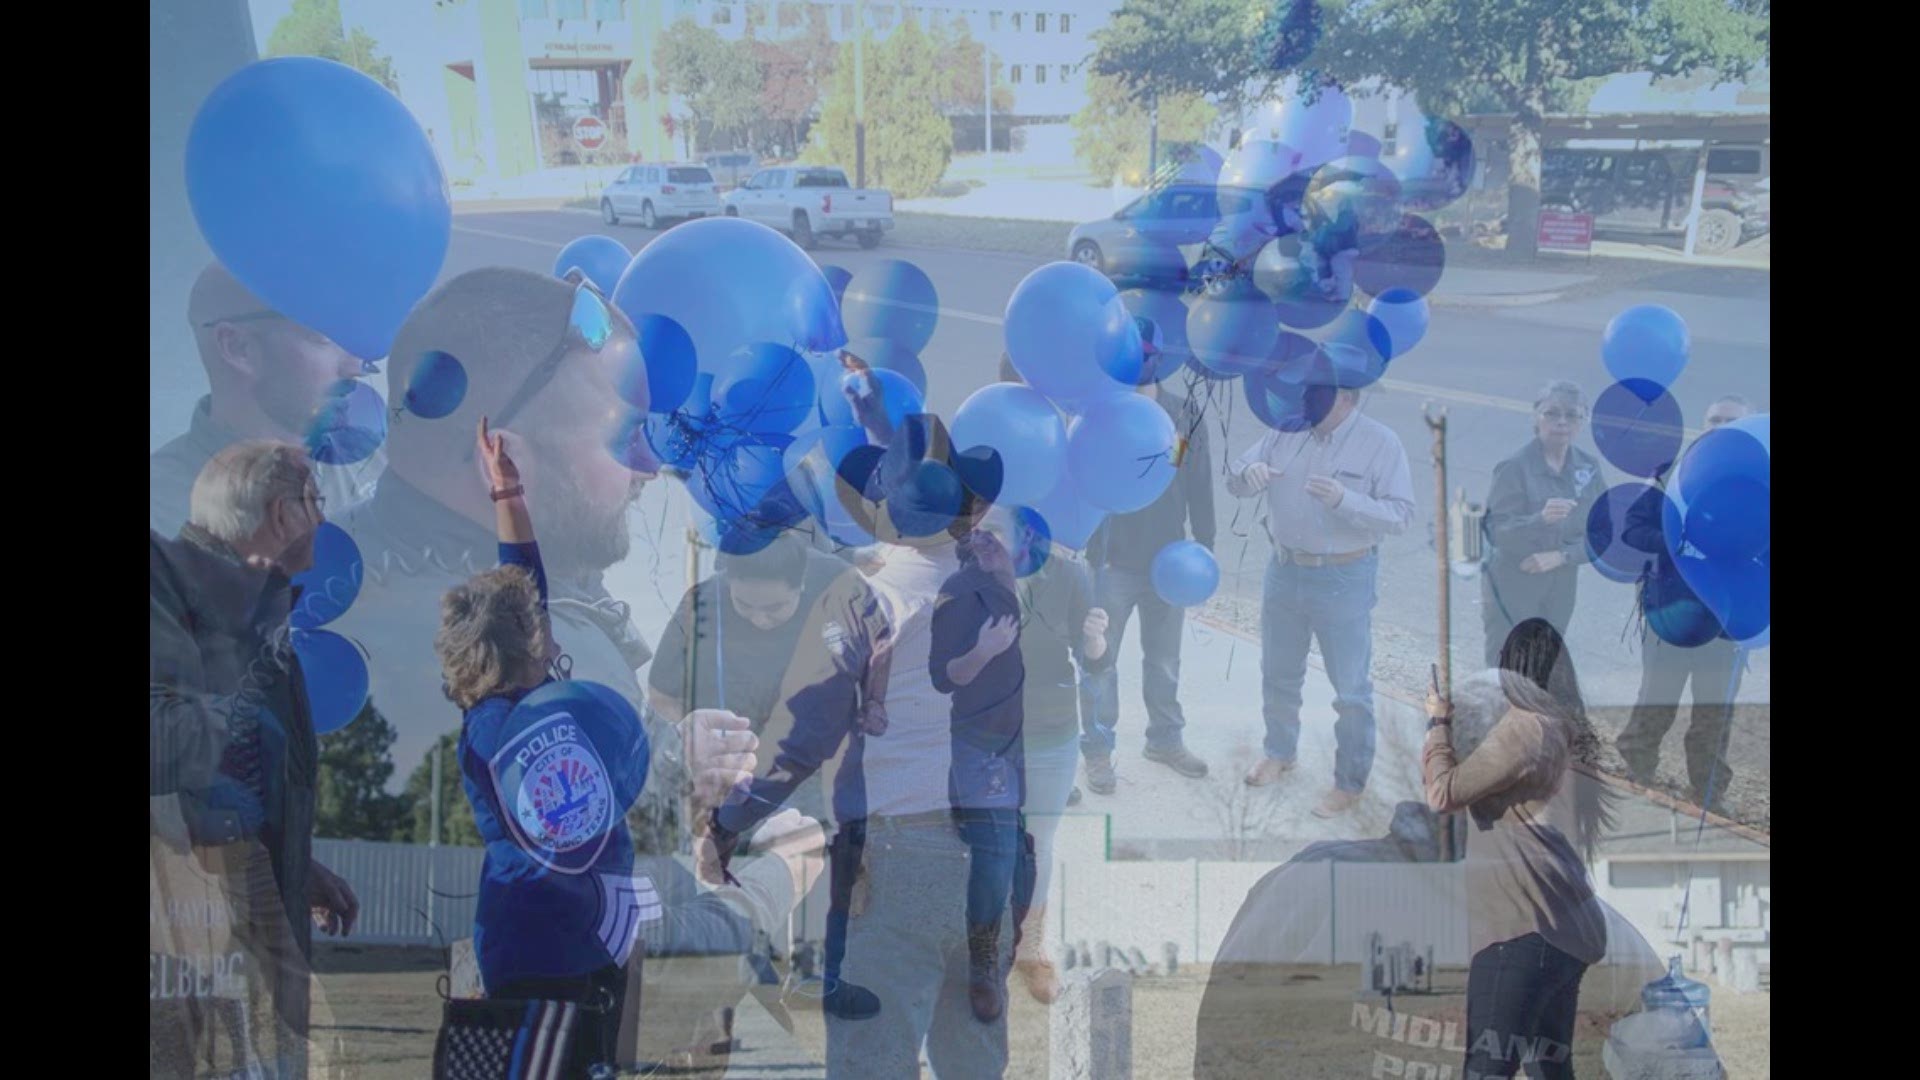 The Midland Police Department held a balloon release in honor of the fallen officer.